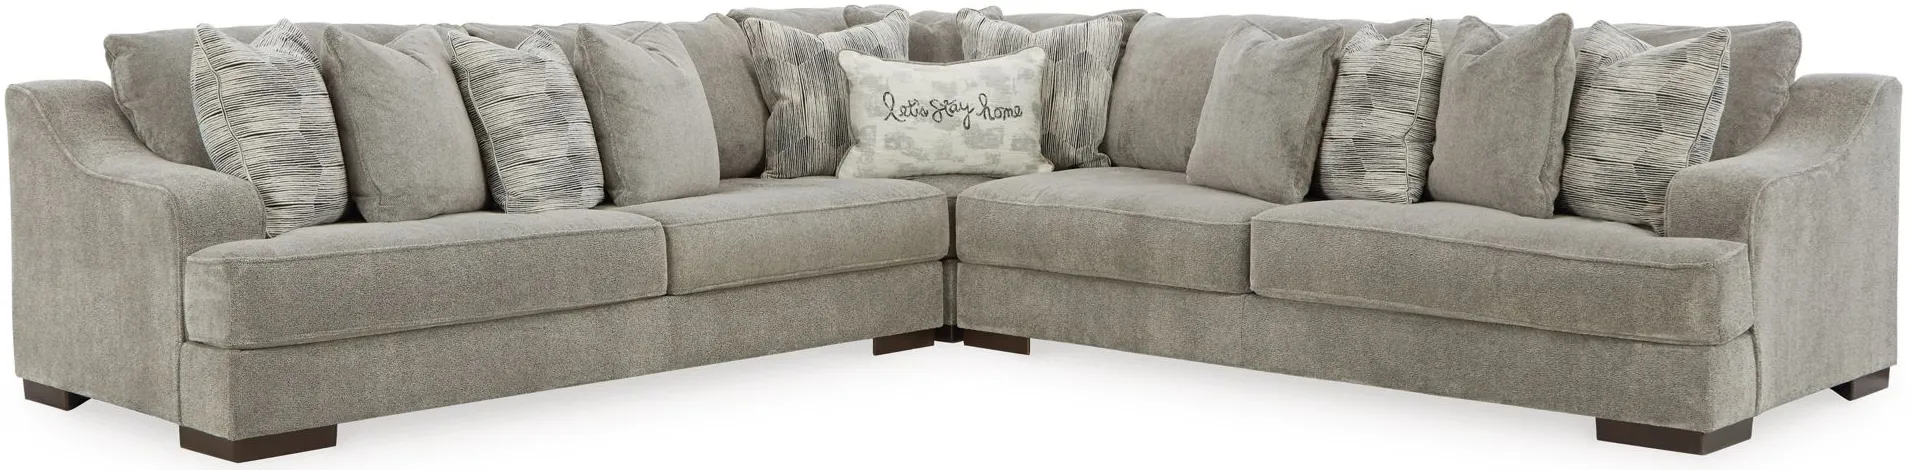 Bayless 3-pc. Sectional in Smoke by Ashley Furniture